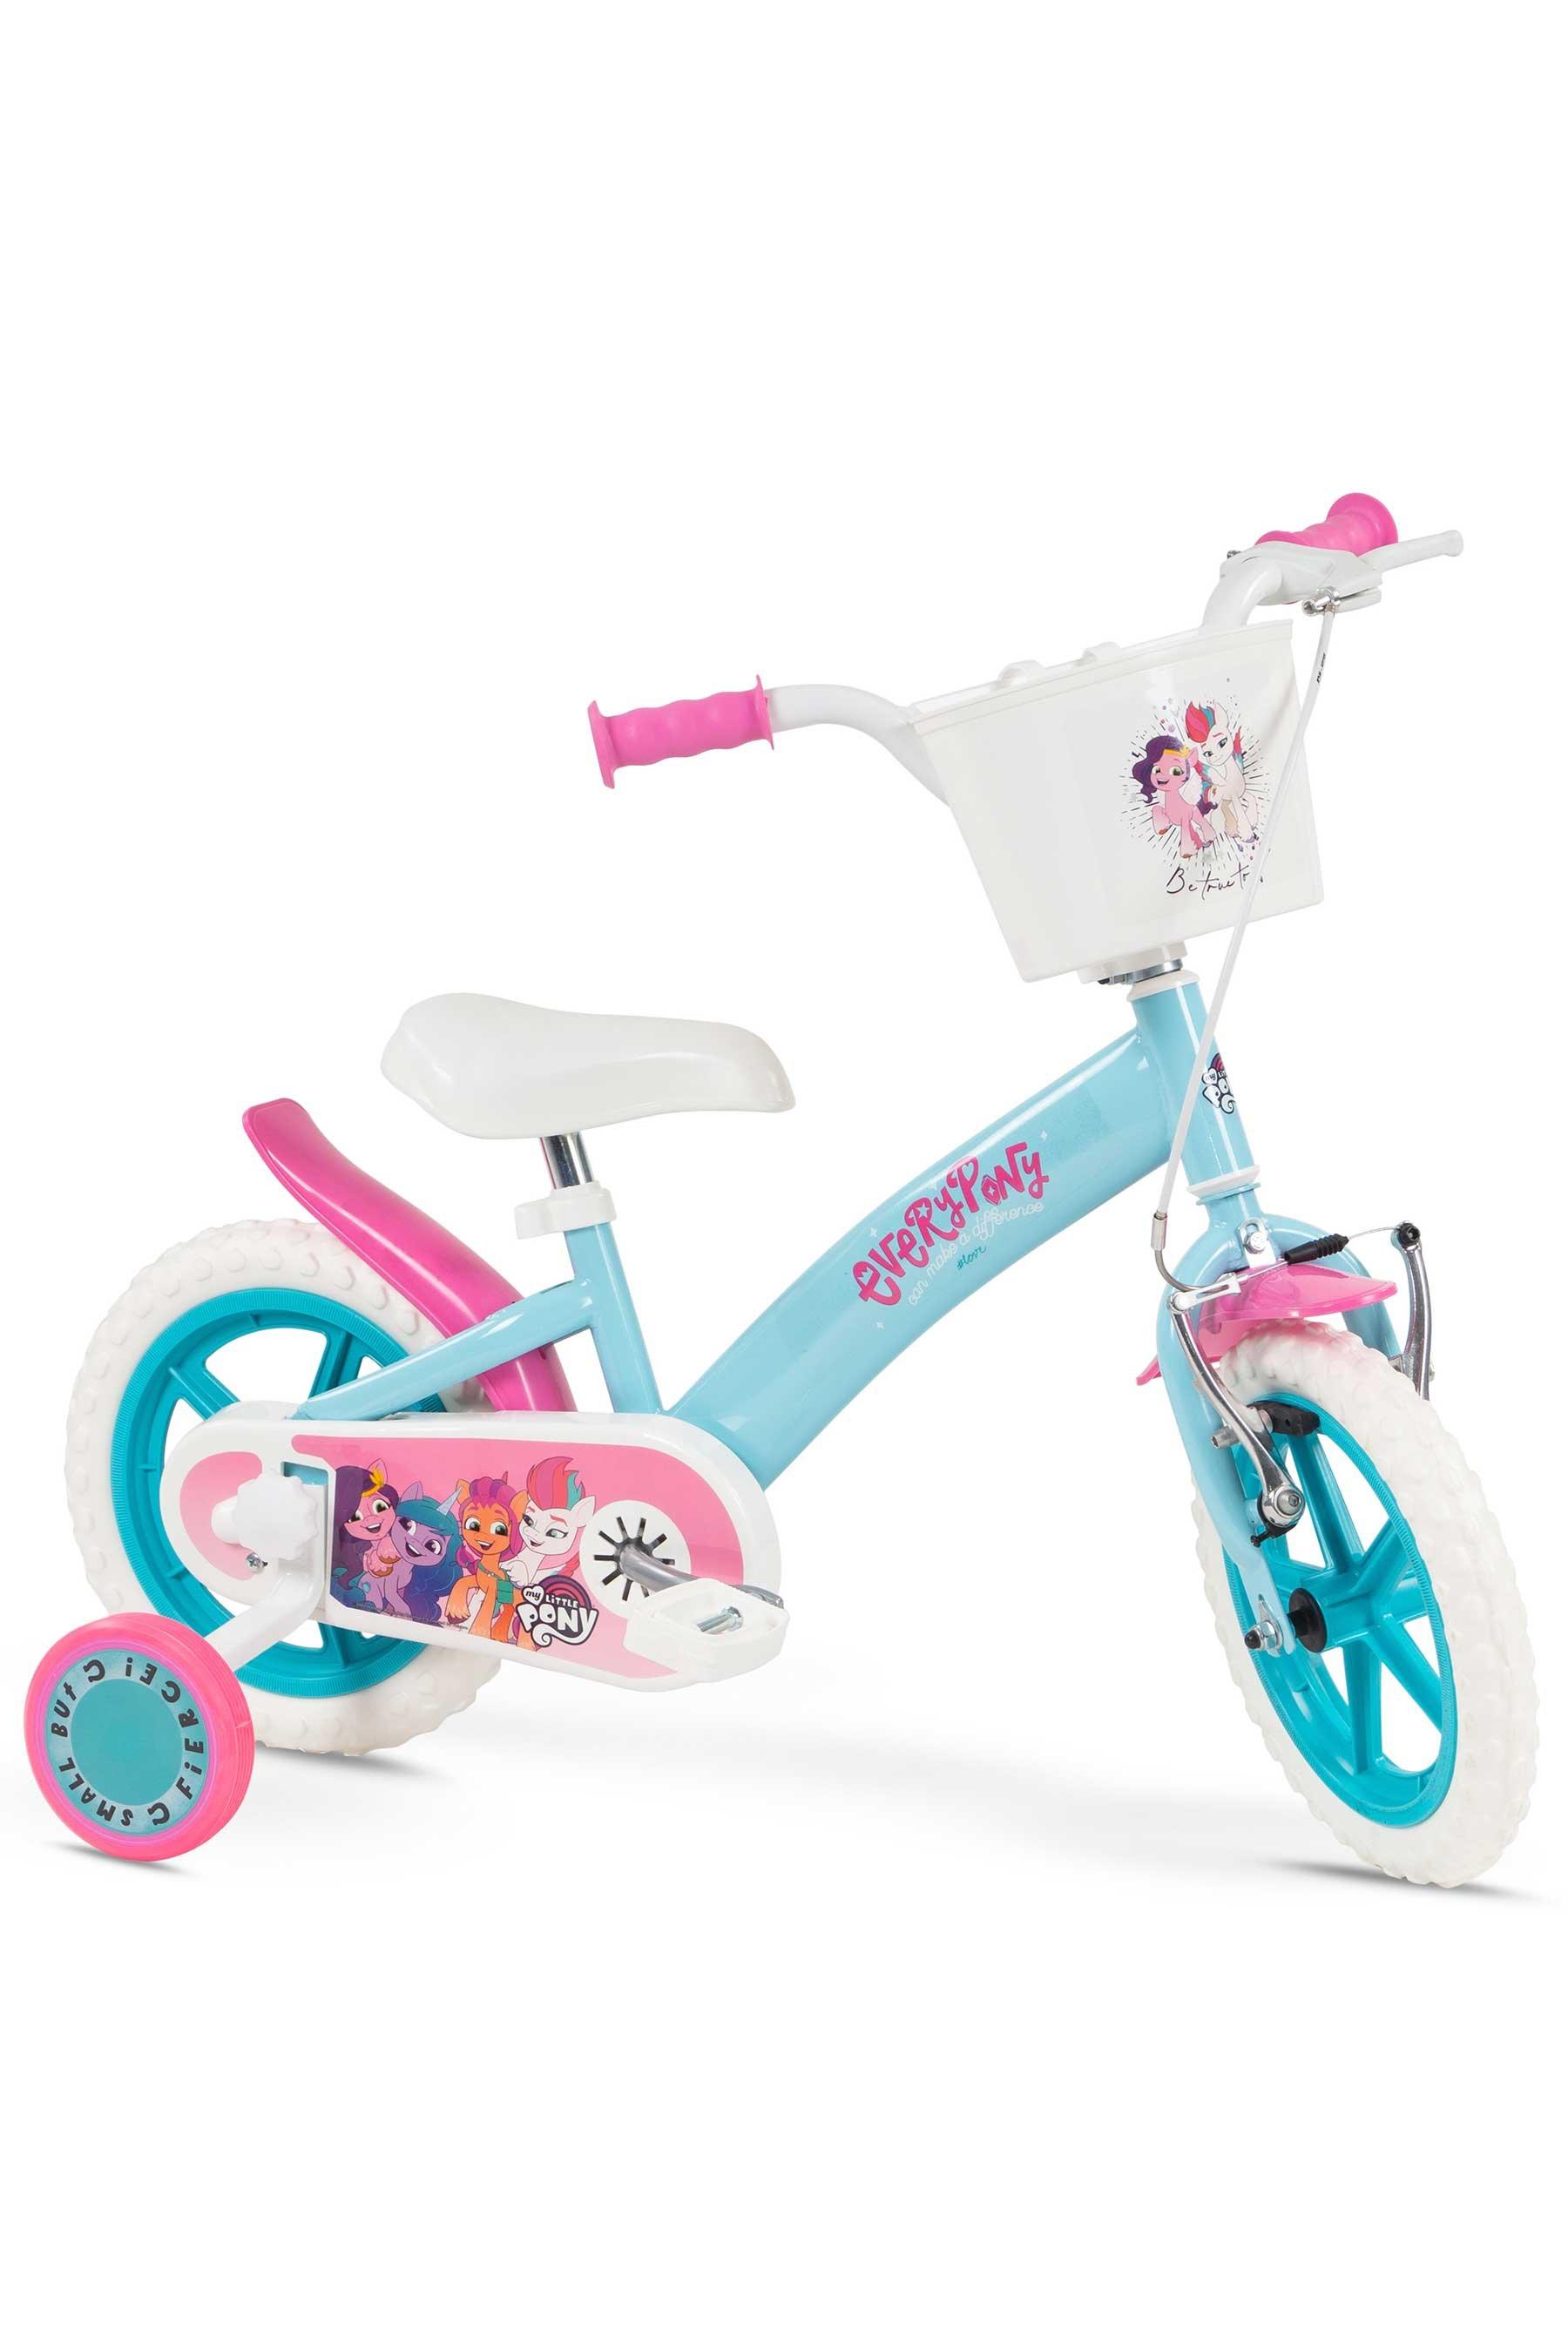 my little pony 12 inch character bike - pink